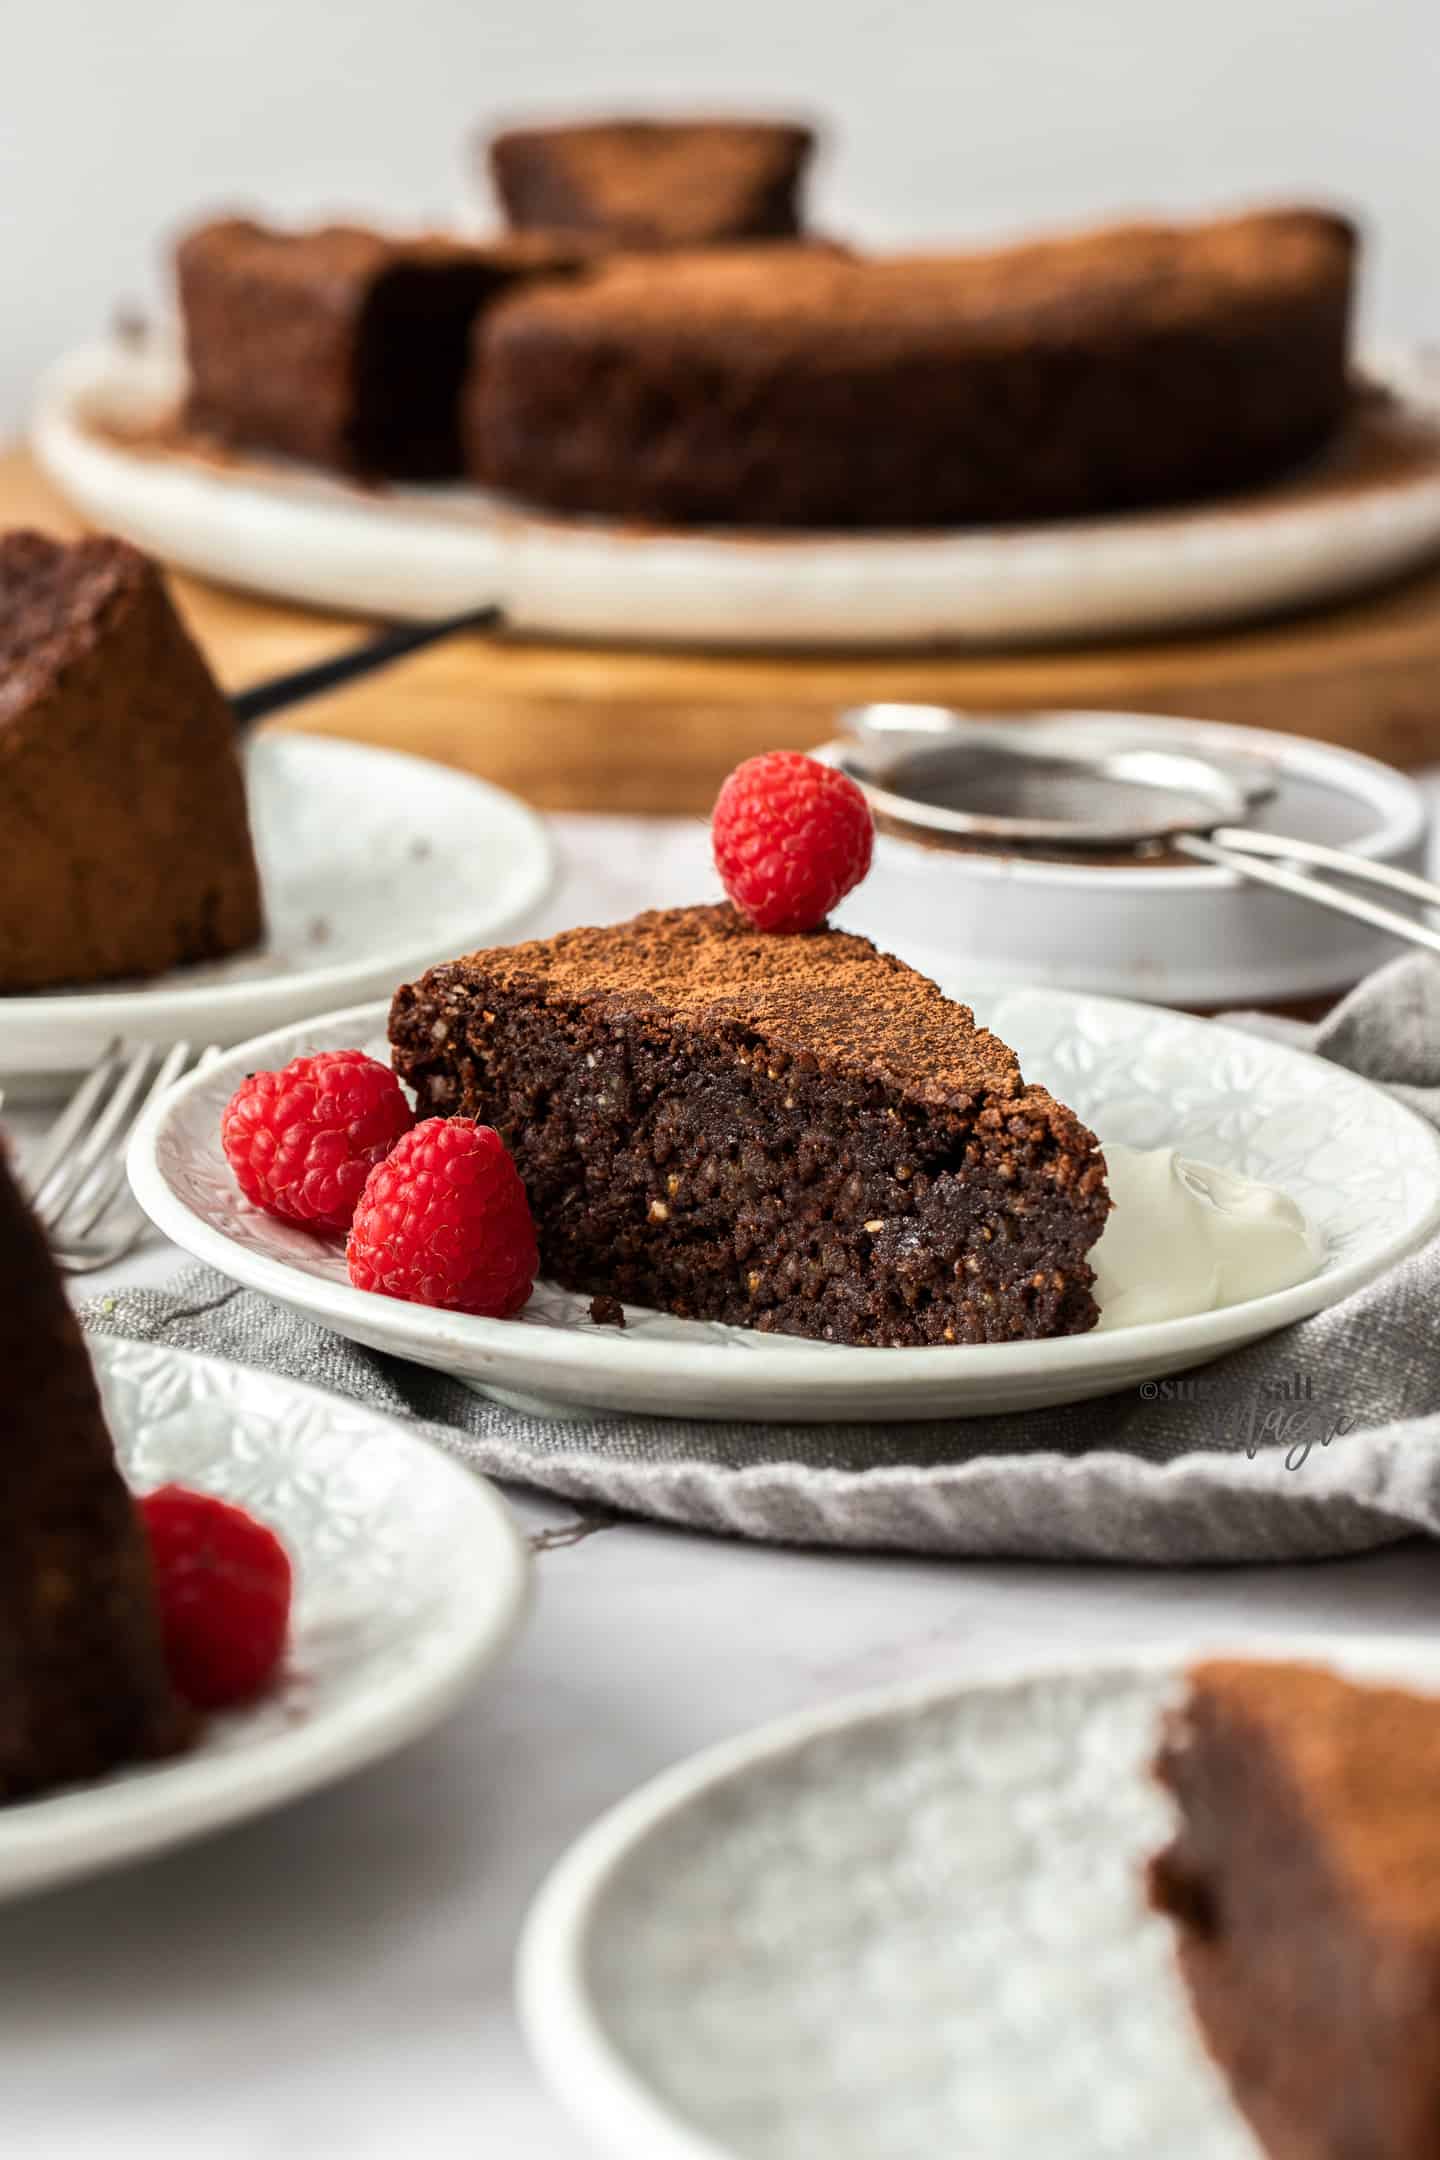 A slice of chocolate cake on a white cake plate with cream and raspberries.